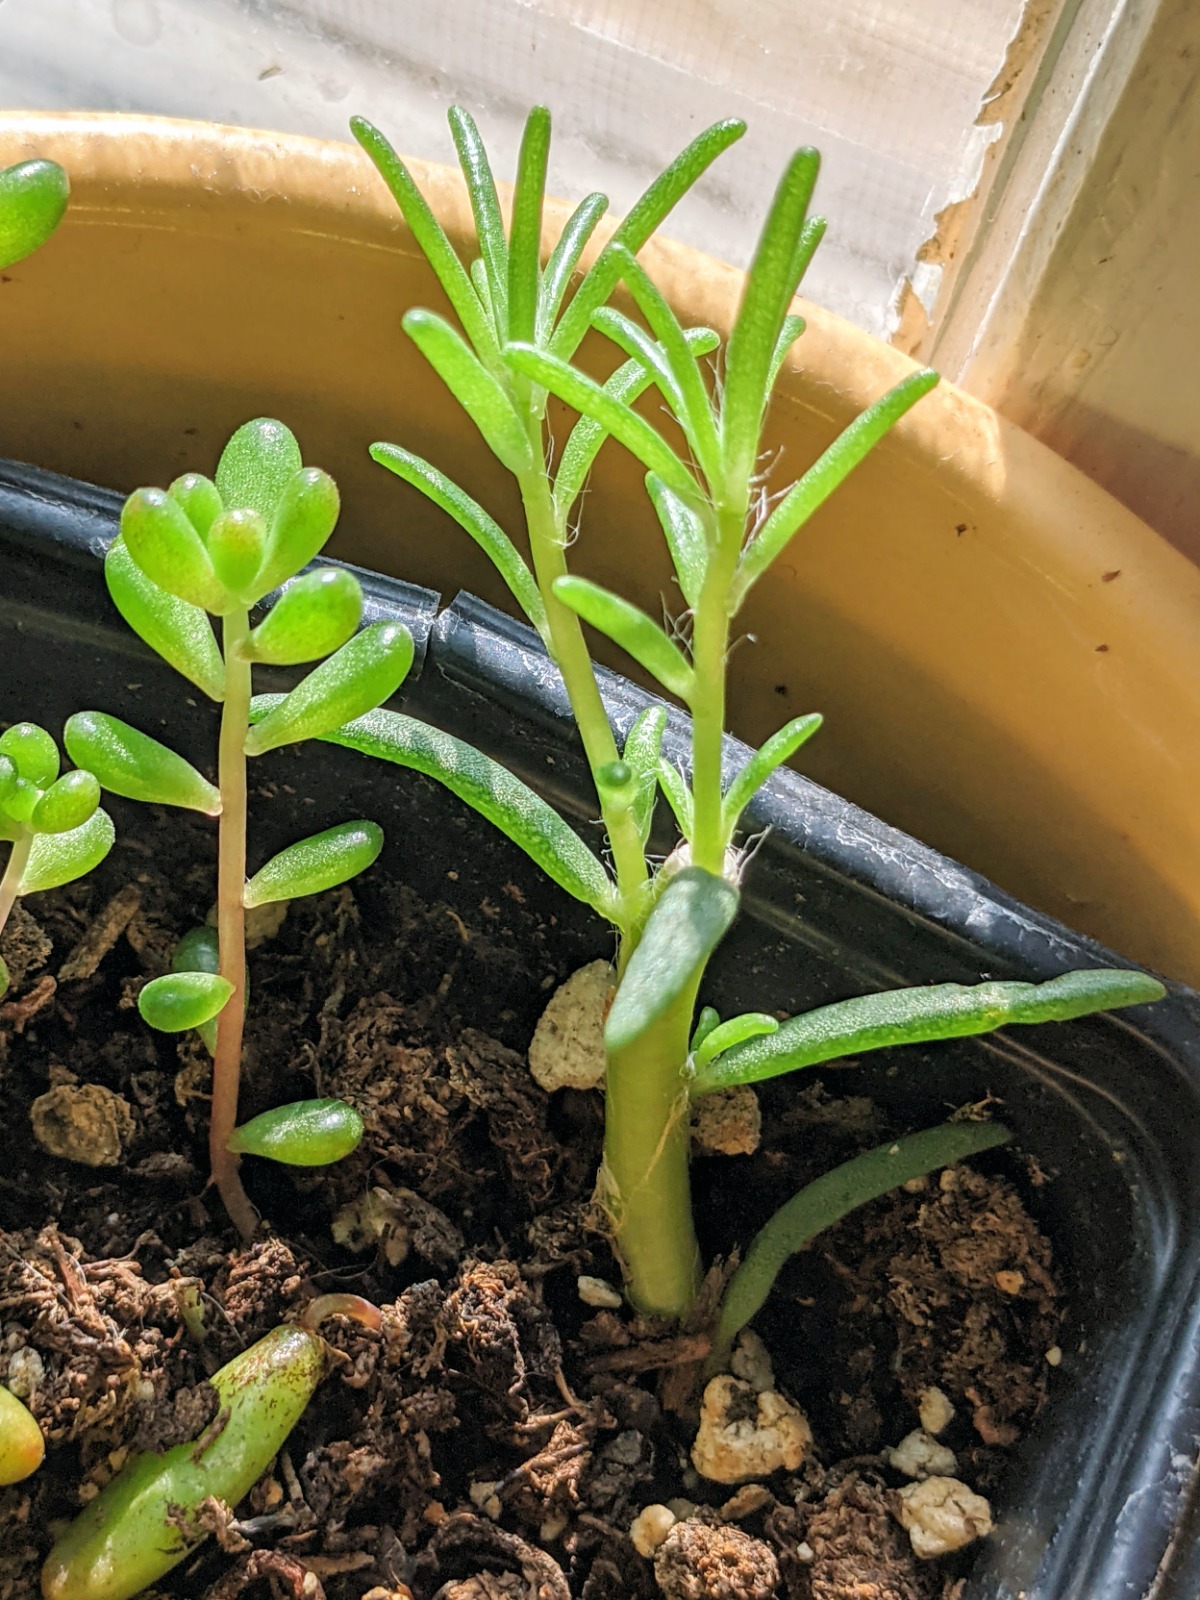 New growth came fast when propagating Portulaca in my kitchen window.